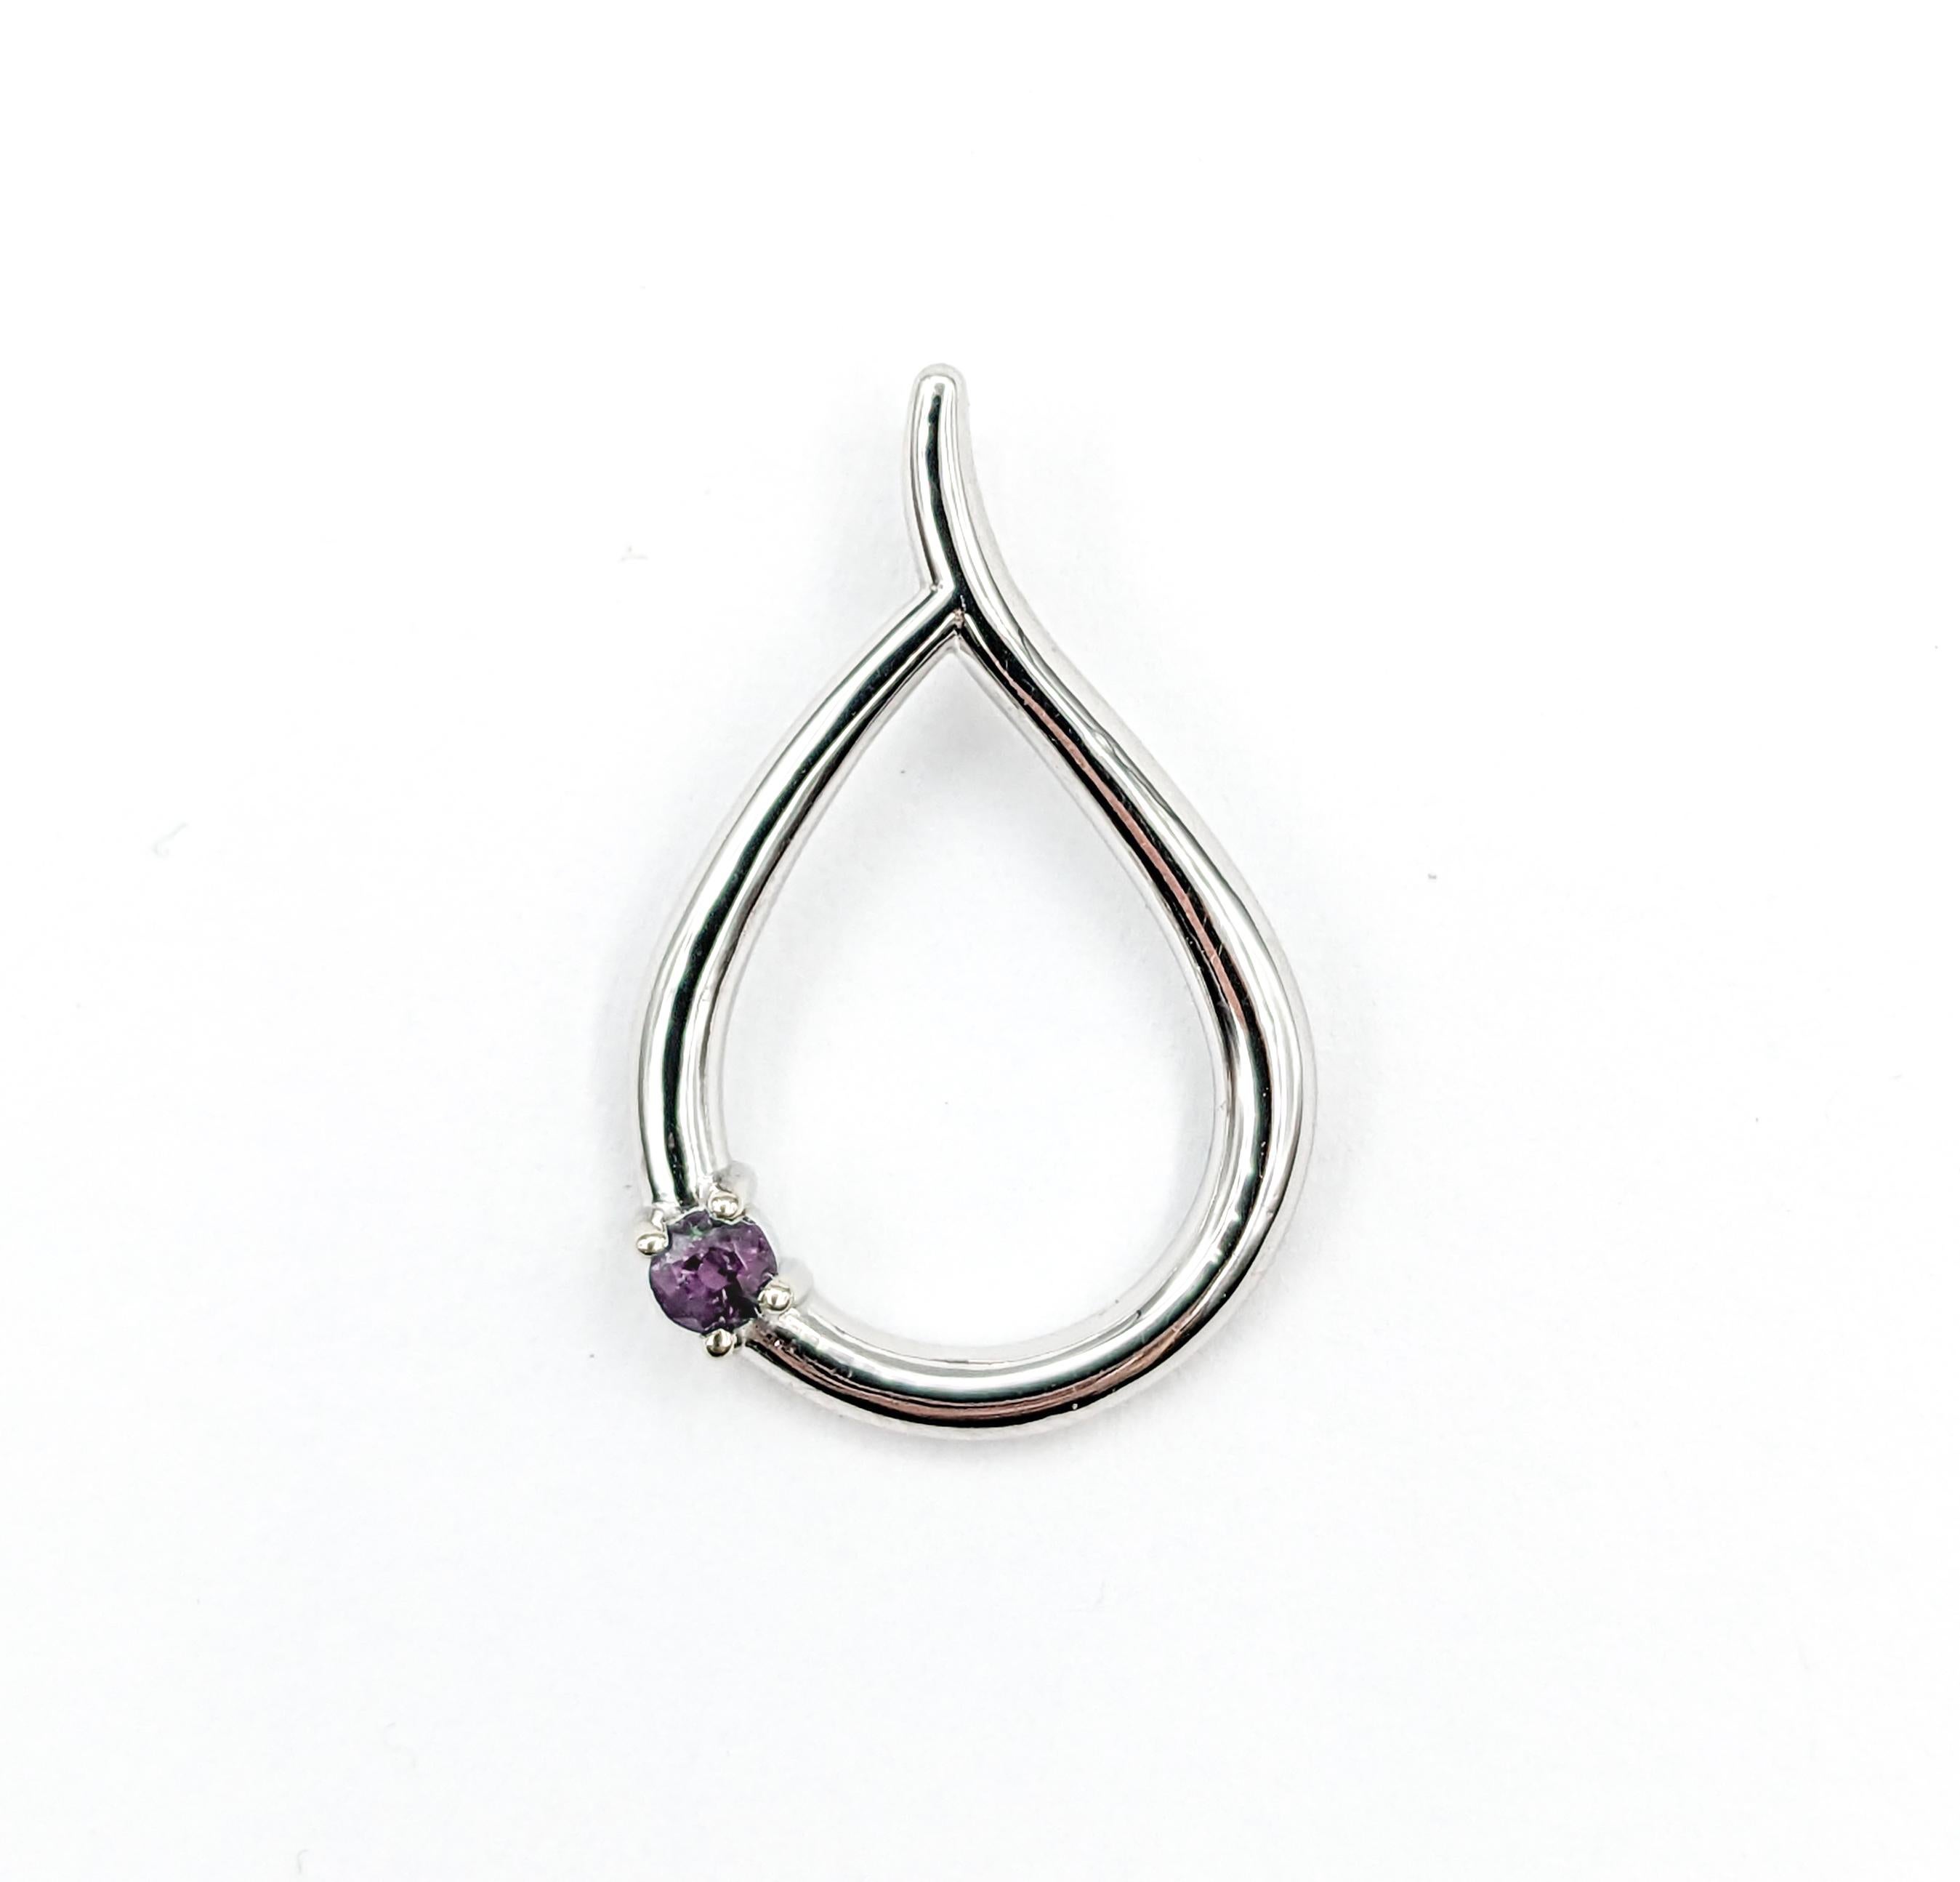 Natural Alexandrite Tear Drop Pendant White Gold

Introducing this exquisite Pendant, masterfully crafted in 14kt White Gold with an elegant Tear Drop design. It is adorned with a captivating 0.08ct Brazilian Alexandrite, celebrated for its